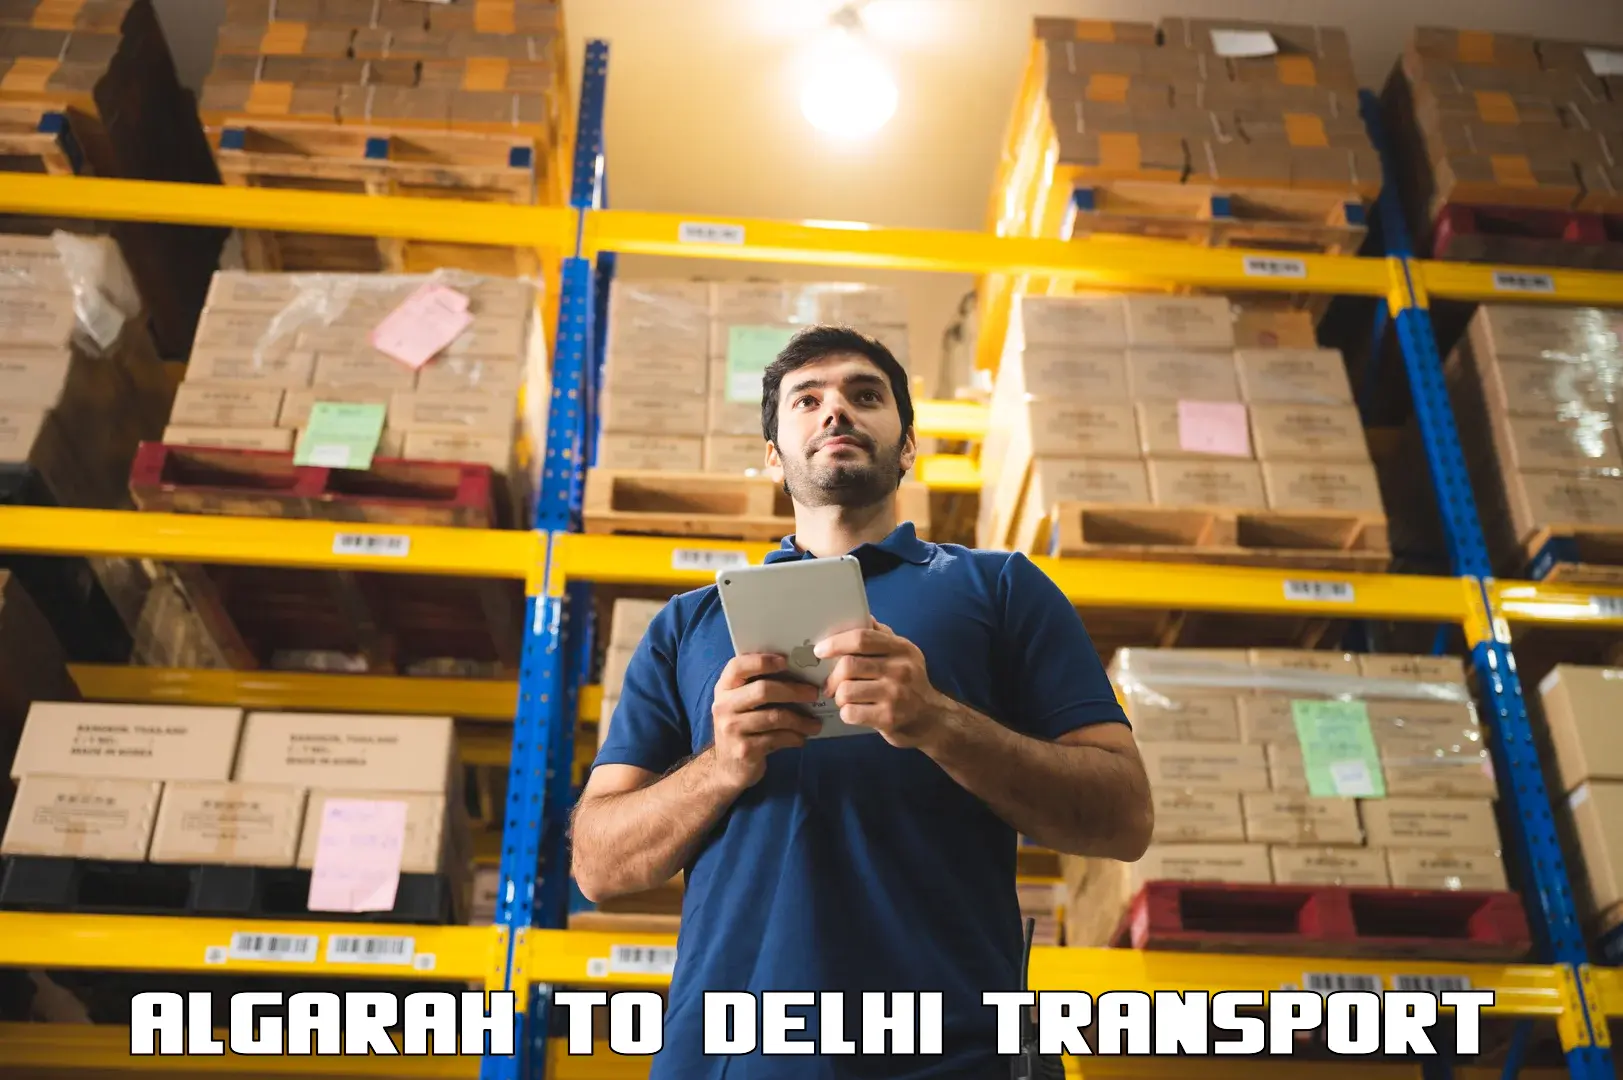 Transport bike from one state to another Algarah to University of Delhi